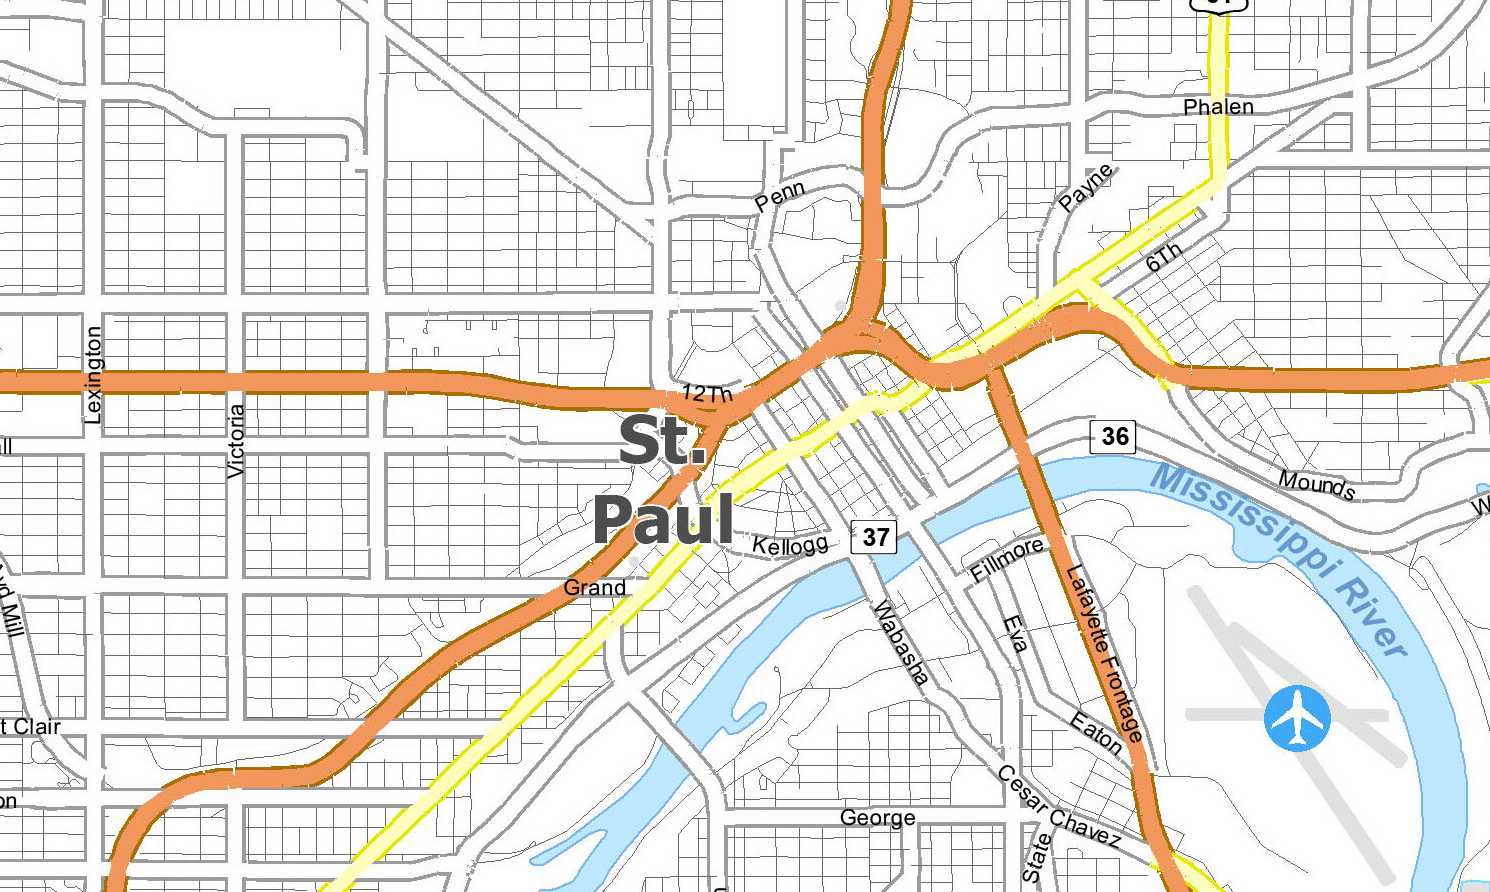 Map of St. Paul City | Political, Blank, Geography And Road Map